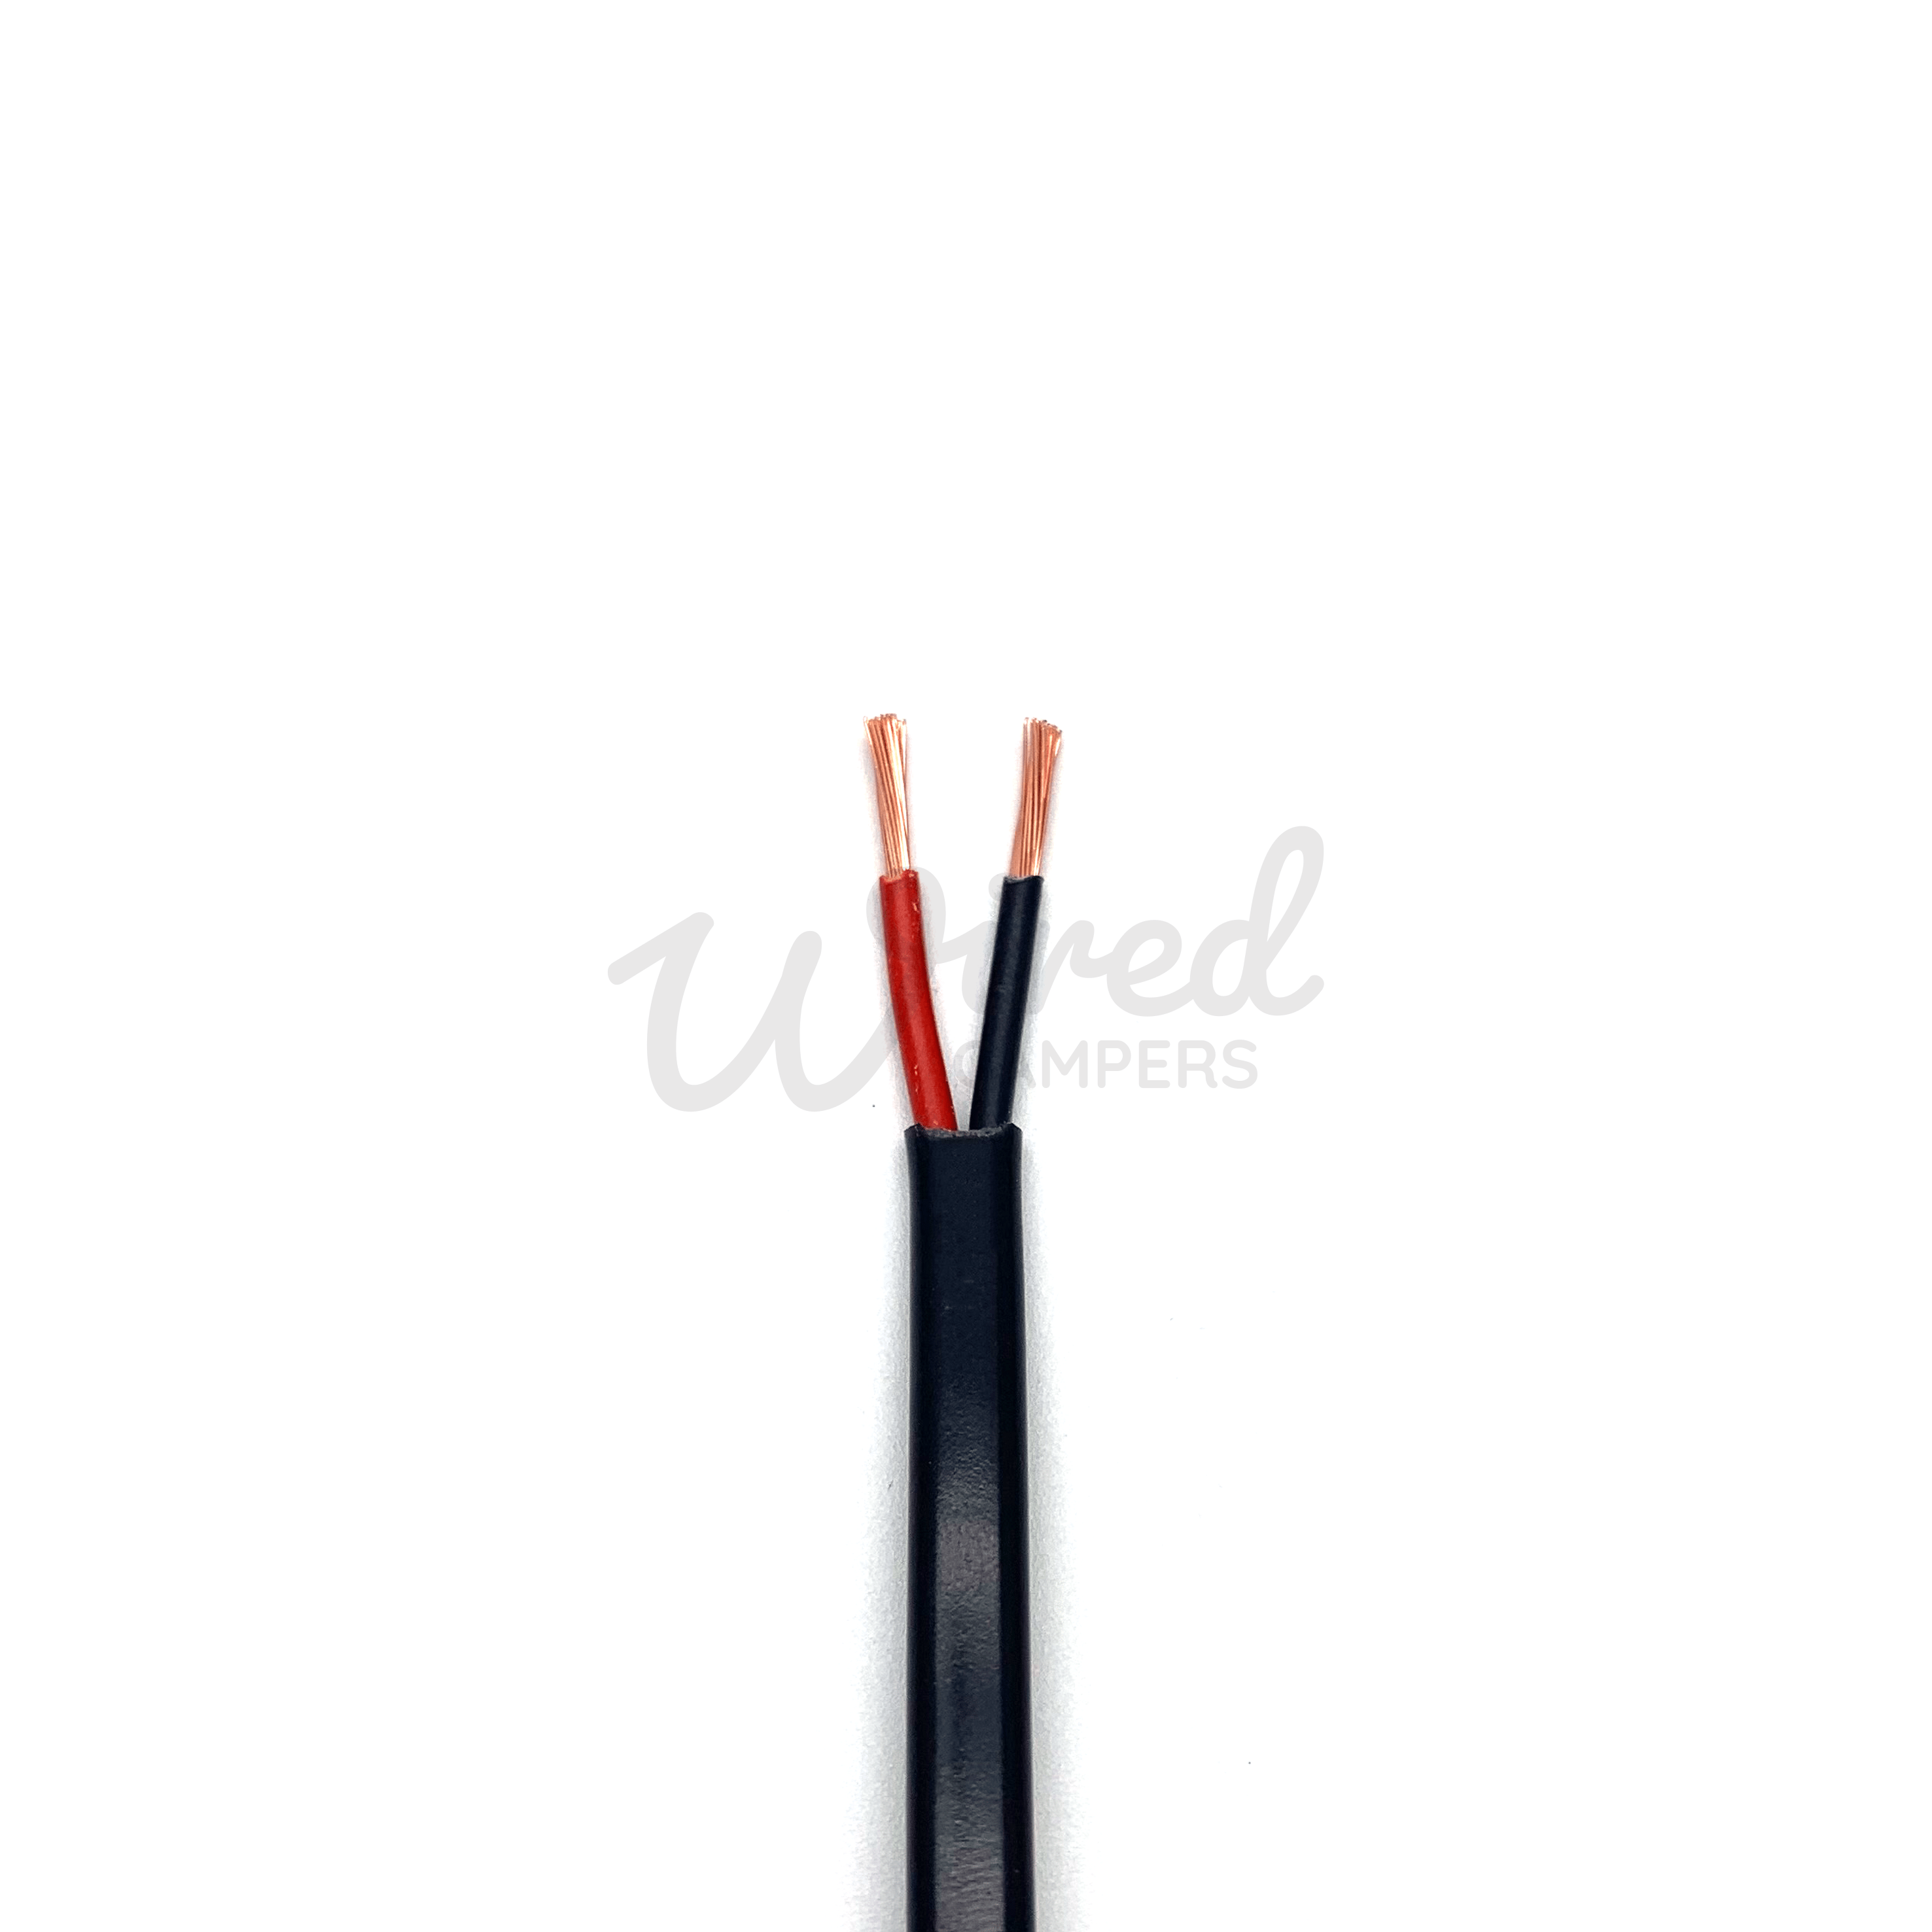 Wired Campers Limited 30M - 2.0mm2 25A Thin Wall Twin Core Flat Automotive Camper Cable